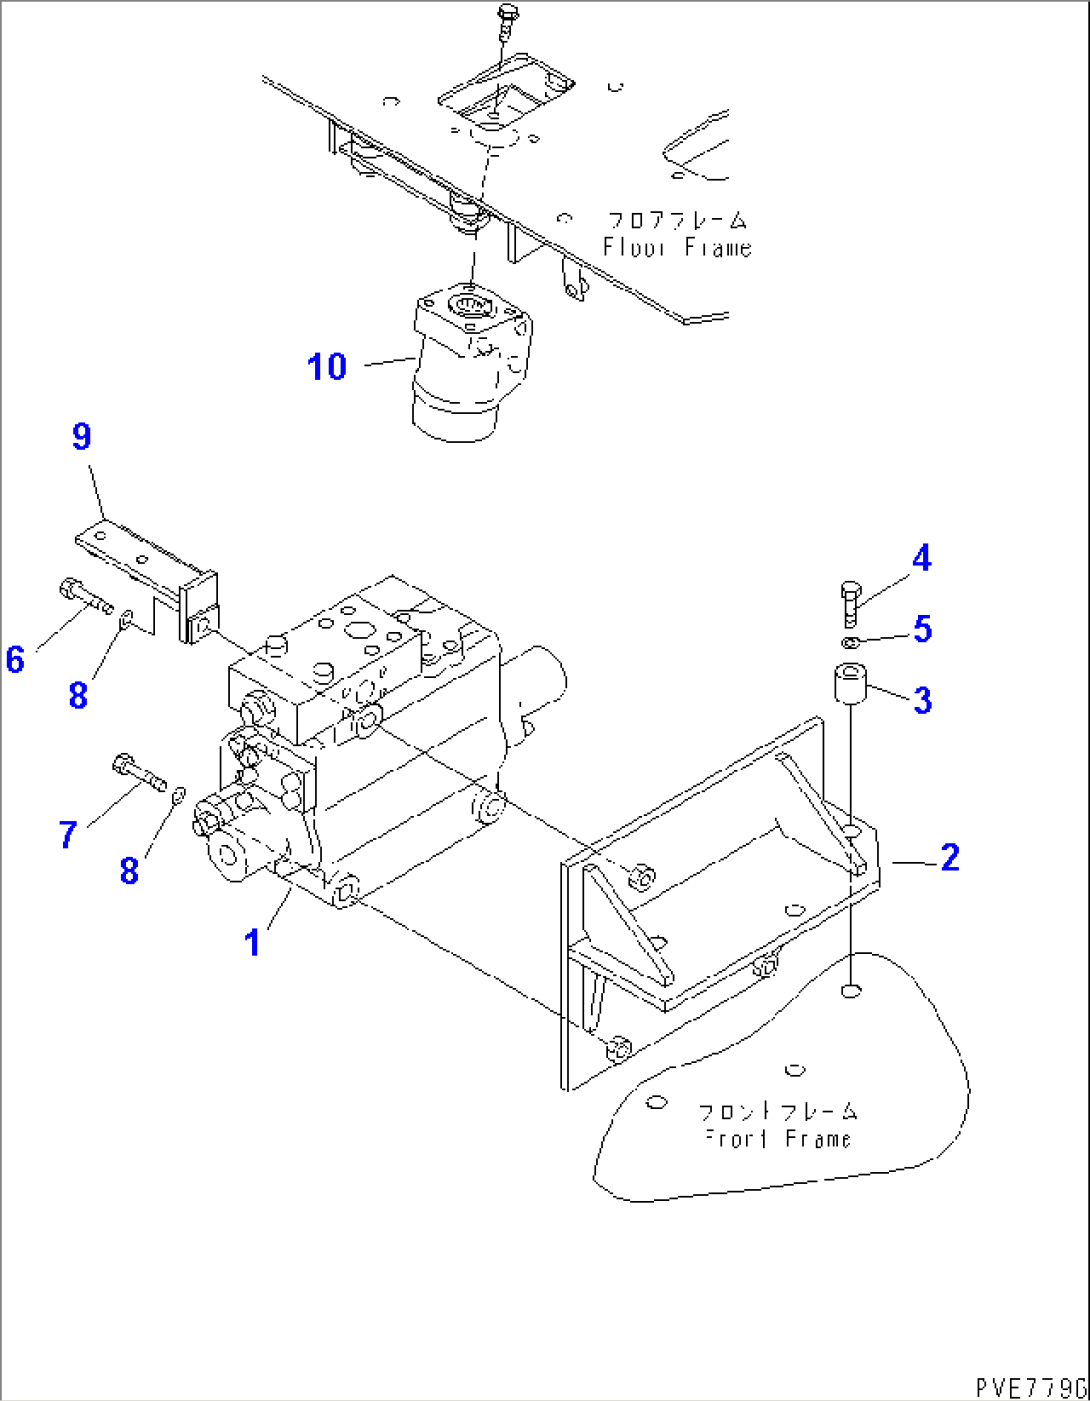 STEERING VALVE (VALVE AND MOUNTING PARTS)(#50001-50003)